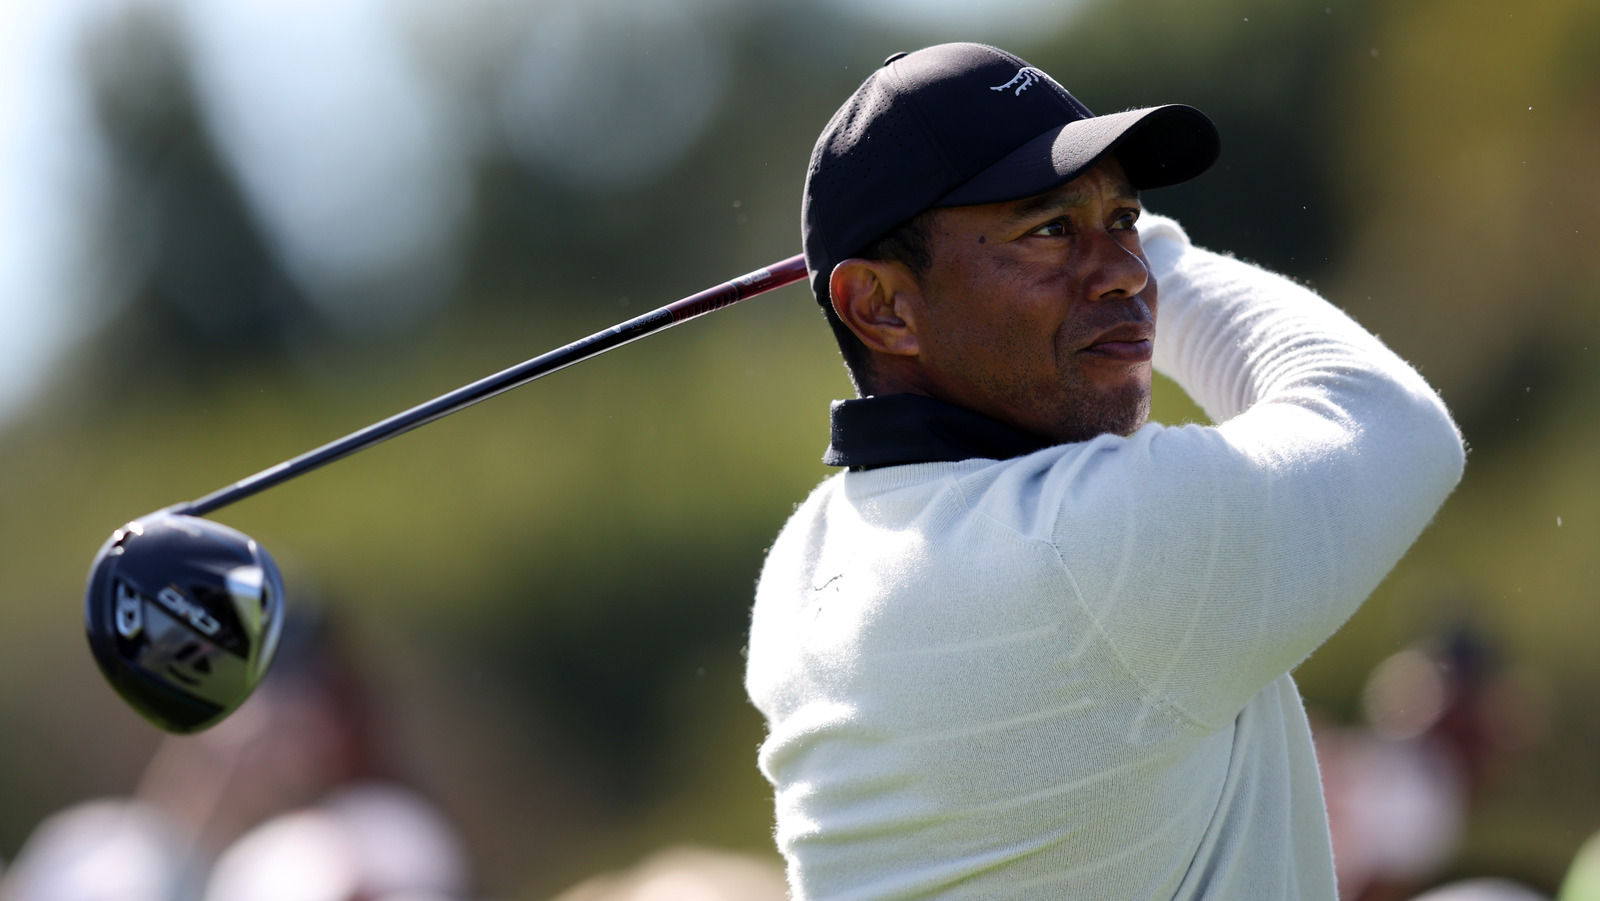 Tiger Woods Pushed Through Back Spasms On The Golf Course. But Is It Safe? – Health Digest